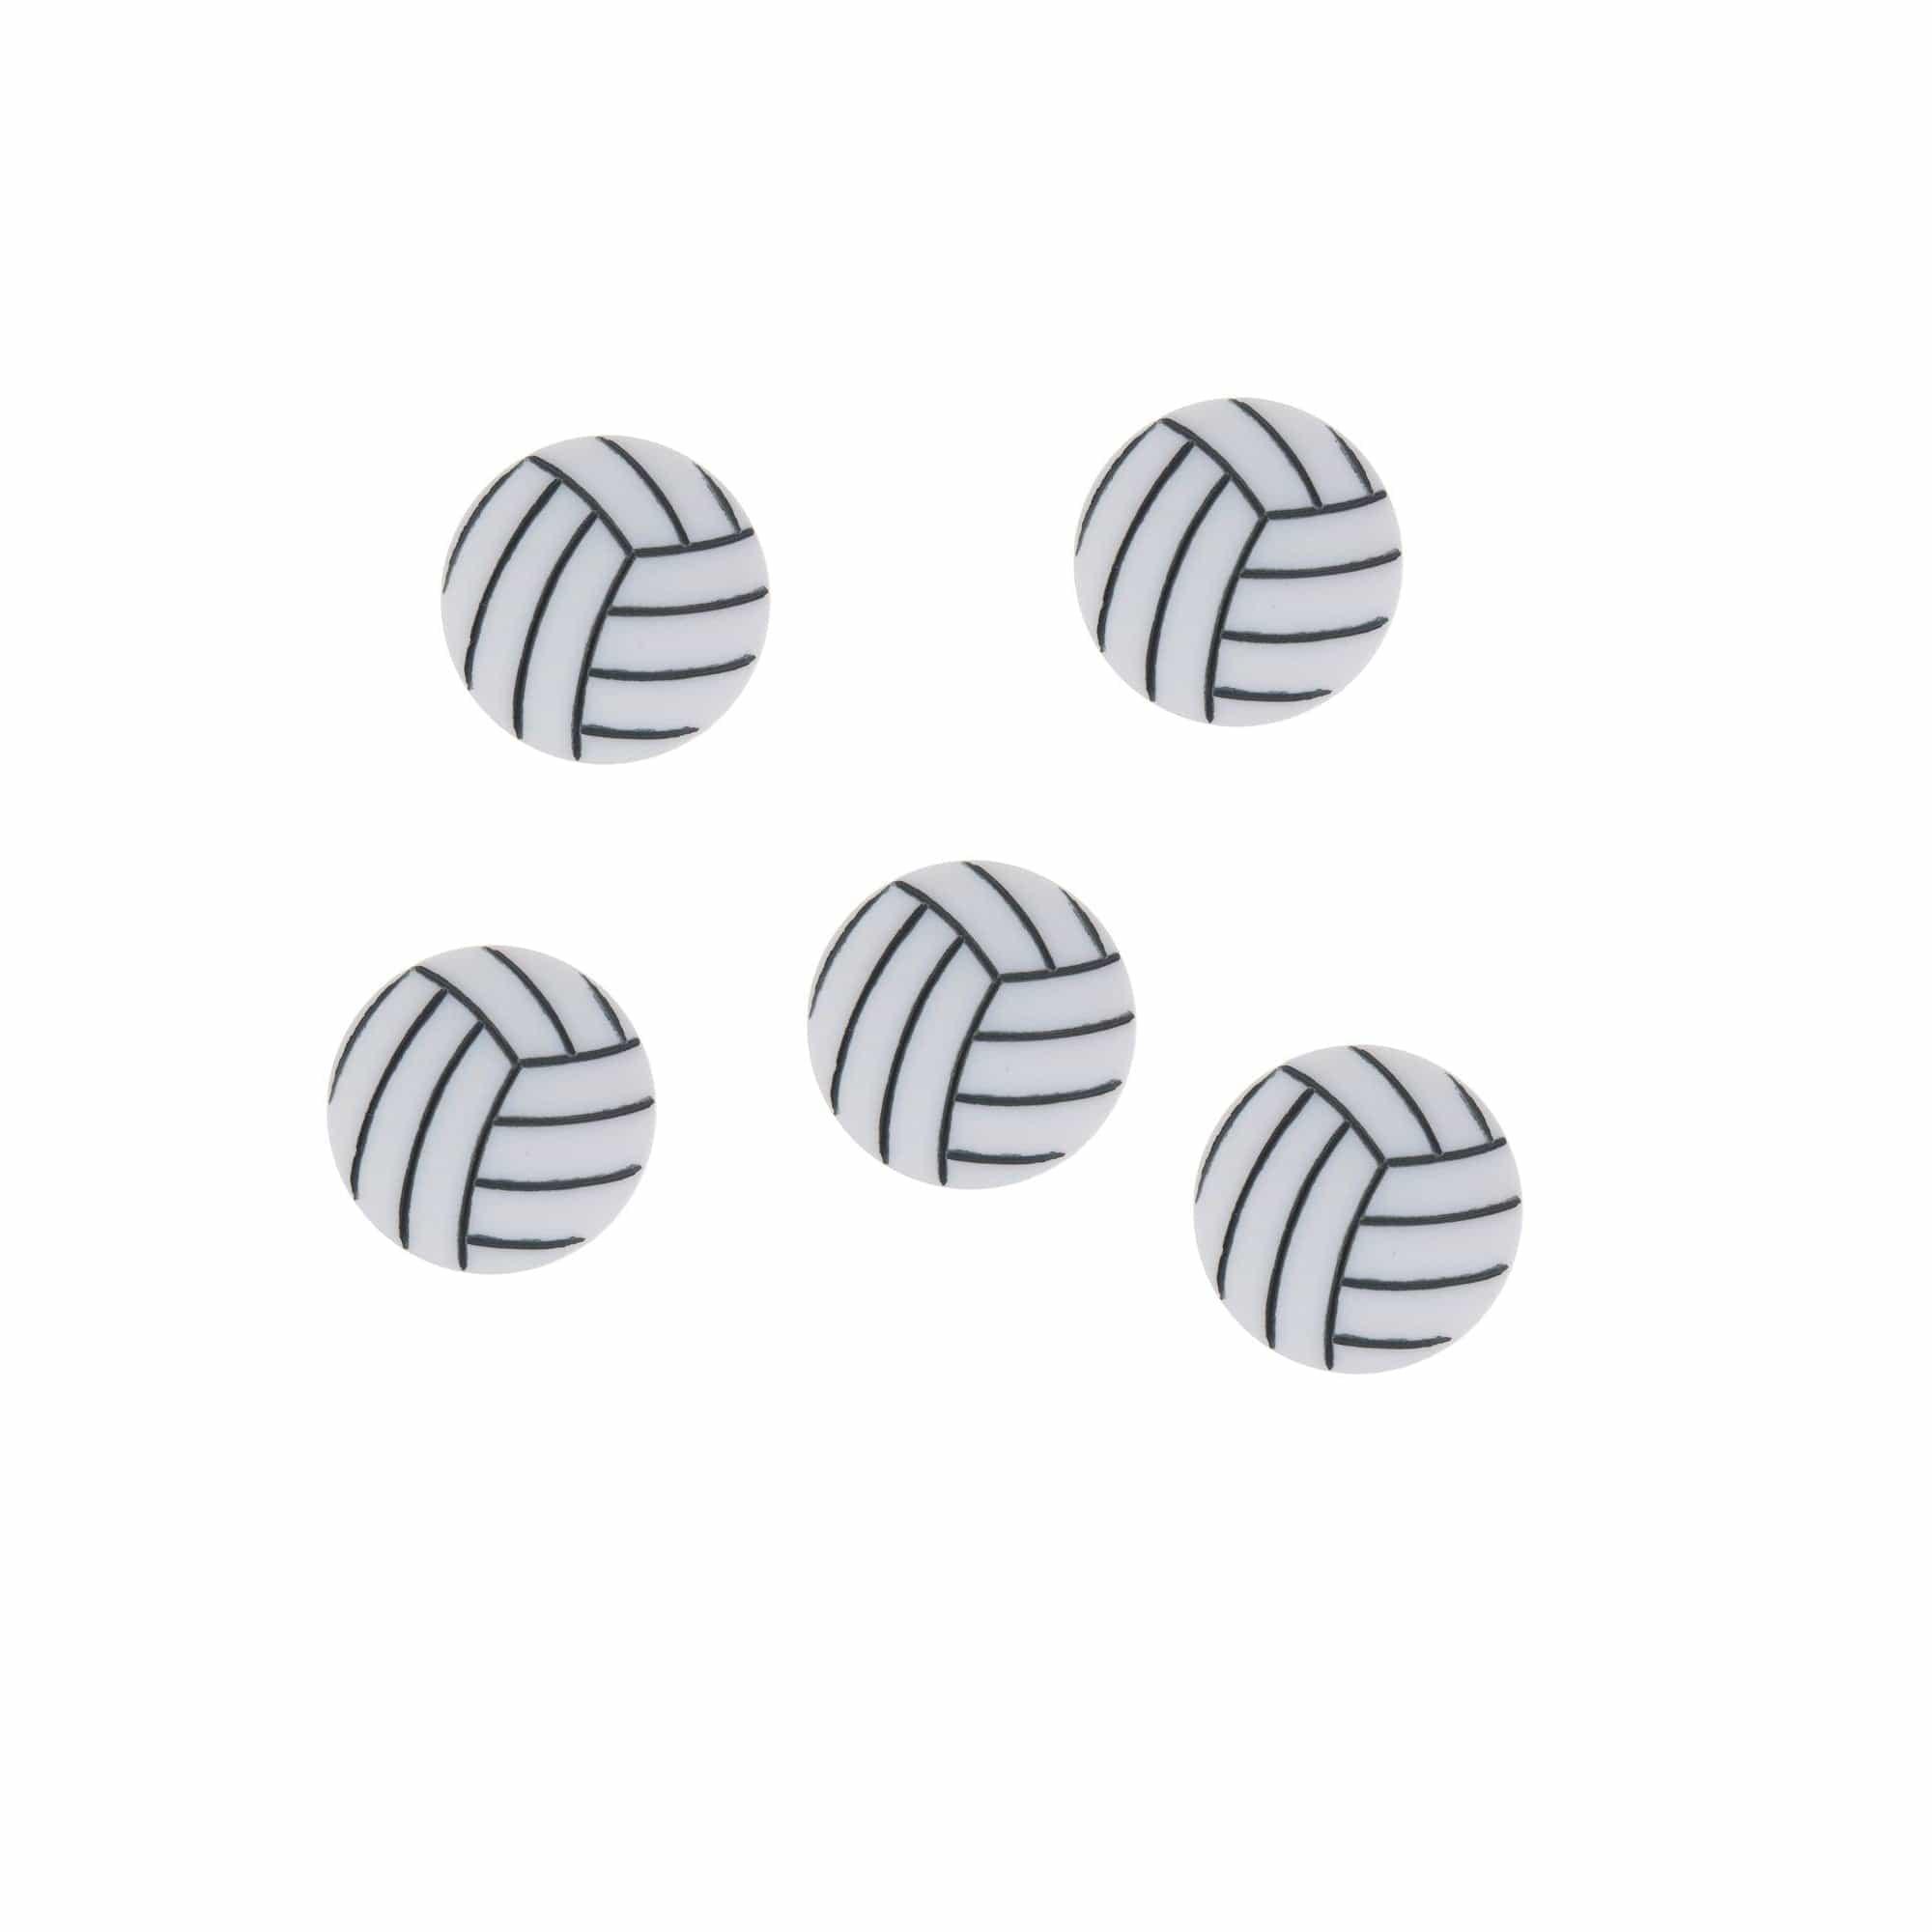 Volleyball Fun Collection Volleyball Scrapbook Buttons by SSC Designs - Pkg. of 5